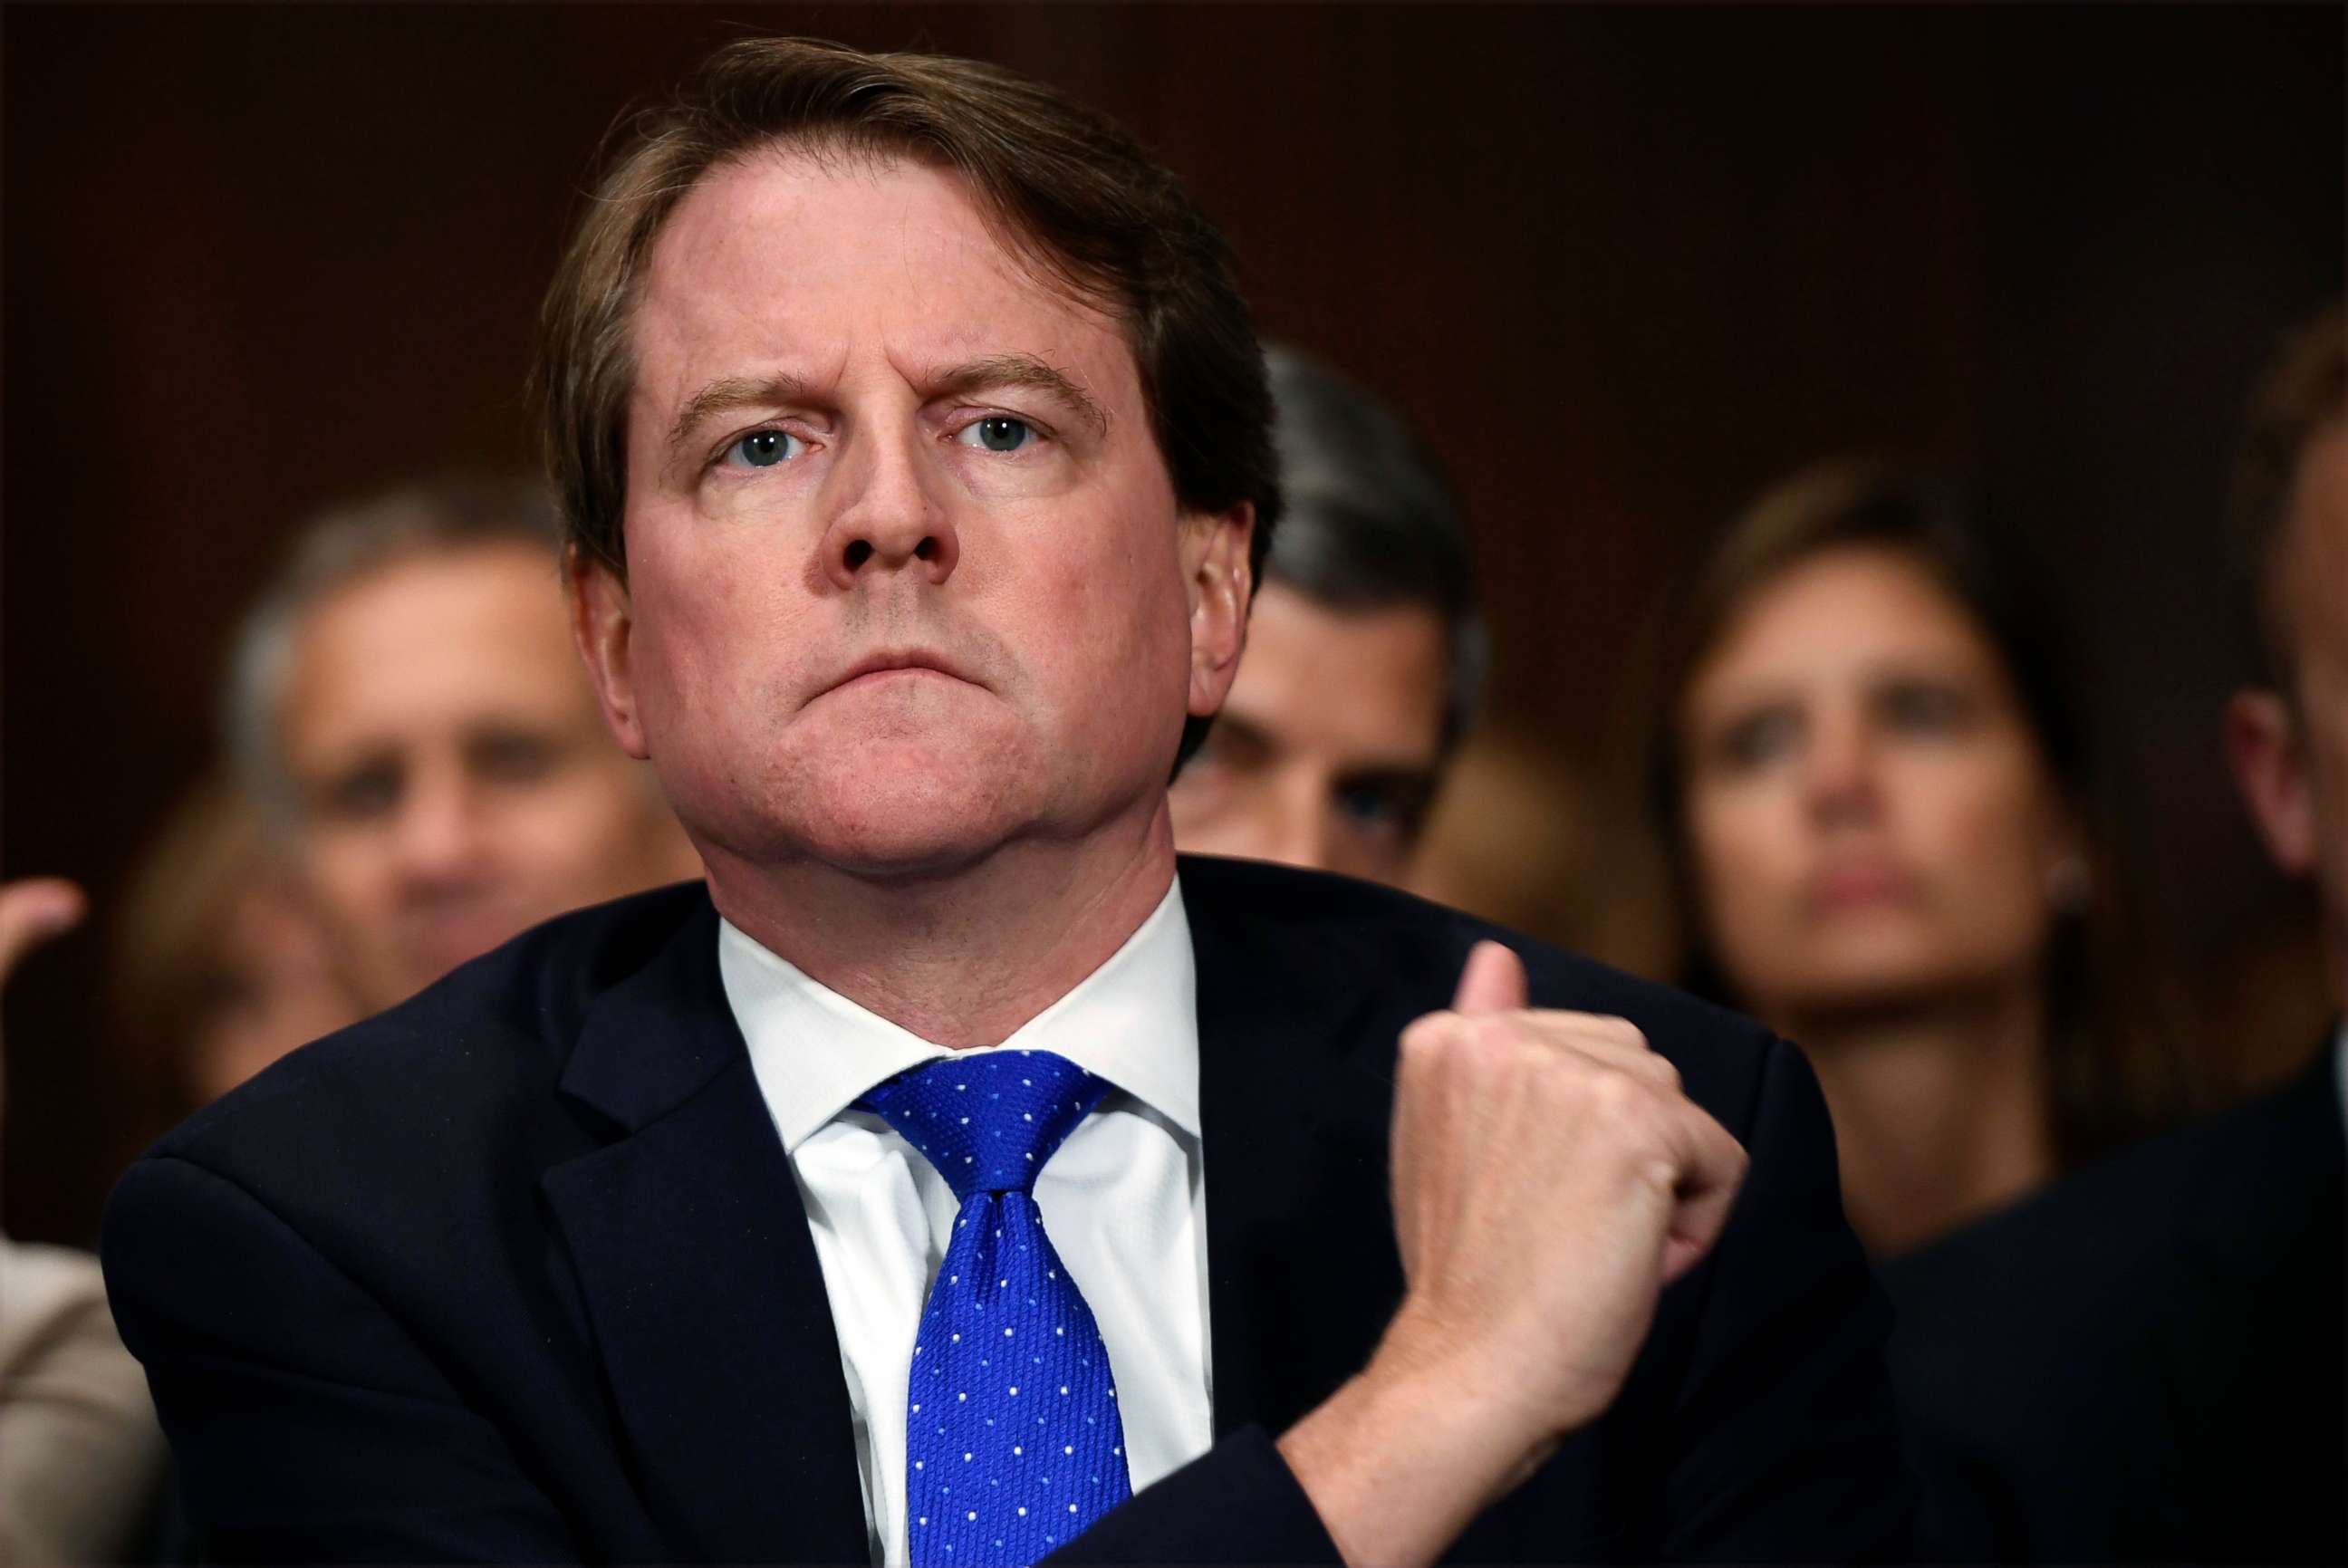 PHOTO: White House counsel Don McGahn listens as Supreme court nominee Brett Kavanaugh testifies before the Senate Judiciary Committee on Capitol Hill in Washington, Sept. 27, 2018.